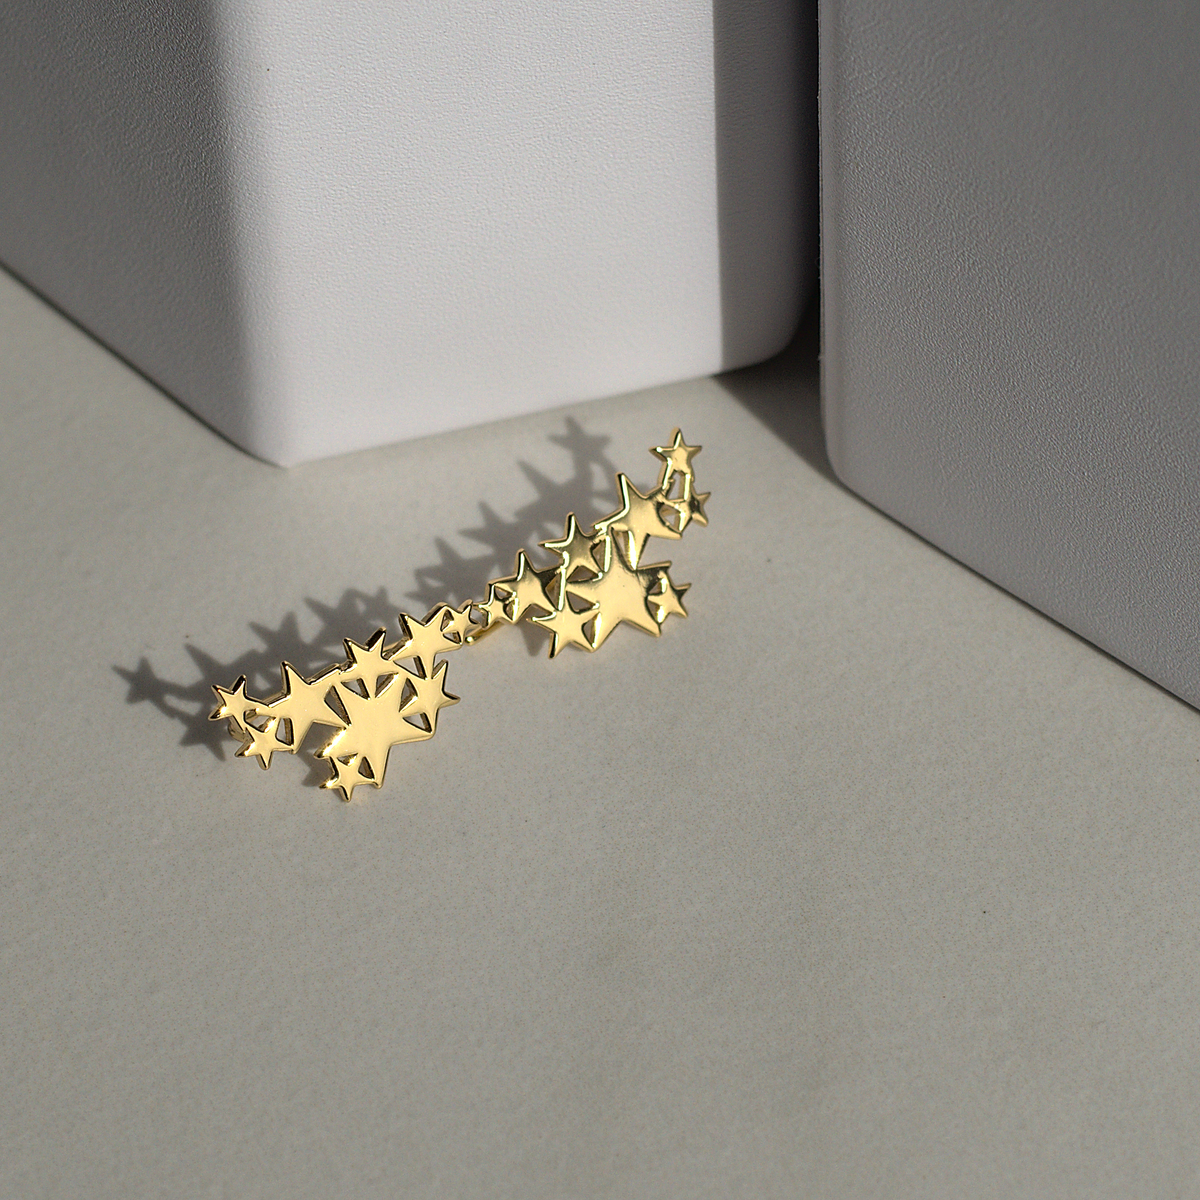 Dainty minimalist everyday affordable jewelry shop local shop small Chicago Earrings stars